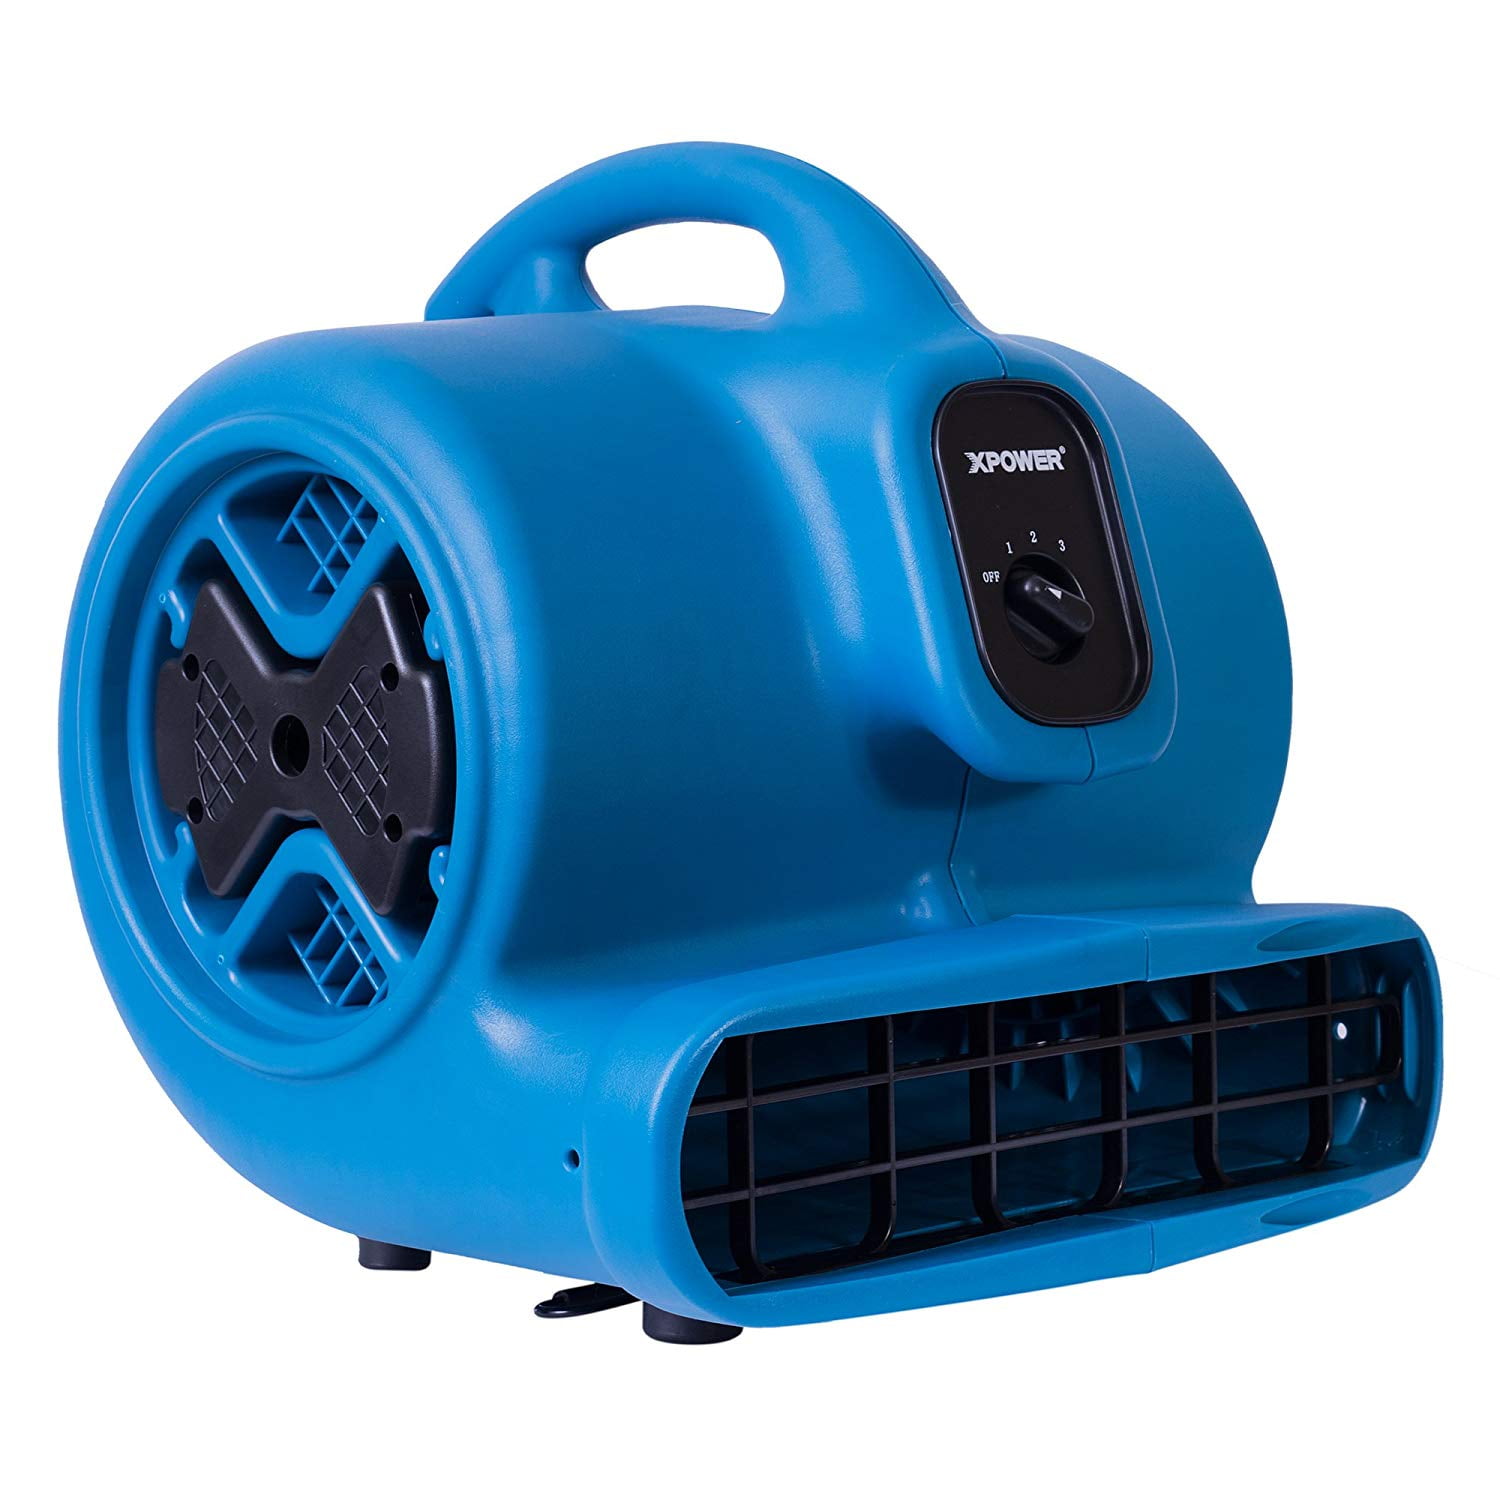 Soleaire Super Fan Portable High Velocity Air Mover Floor Blower Carpet Dryer ✅✅ 